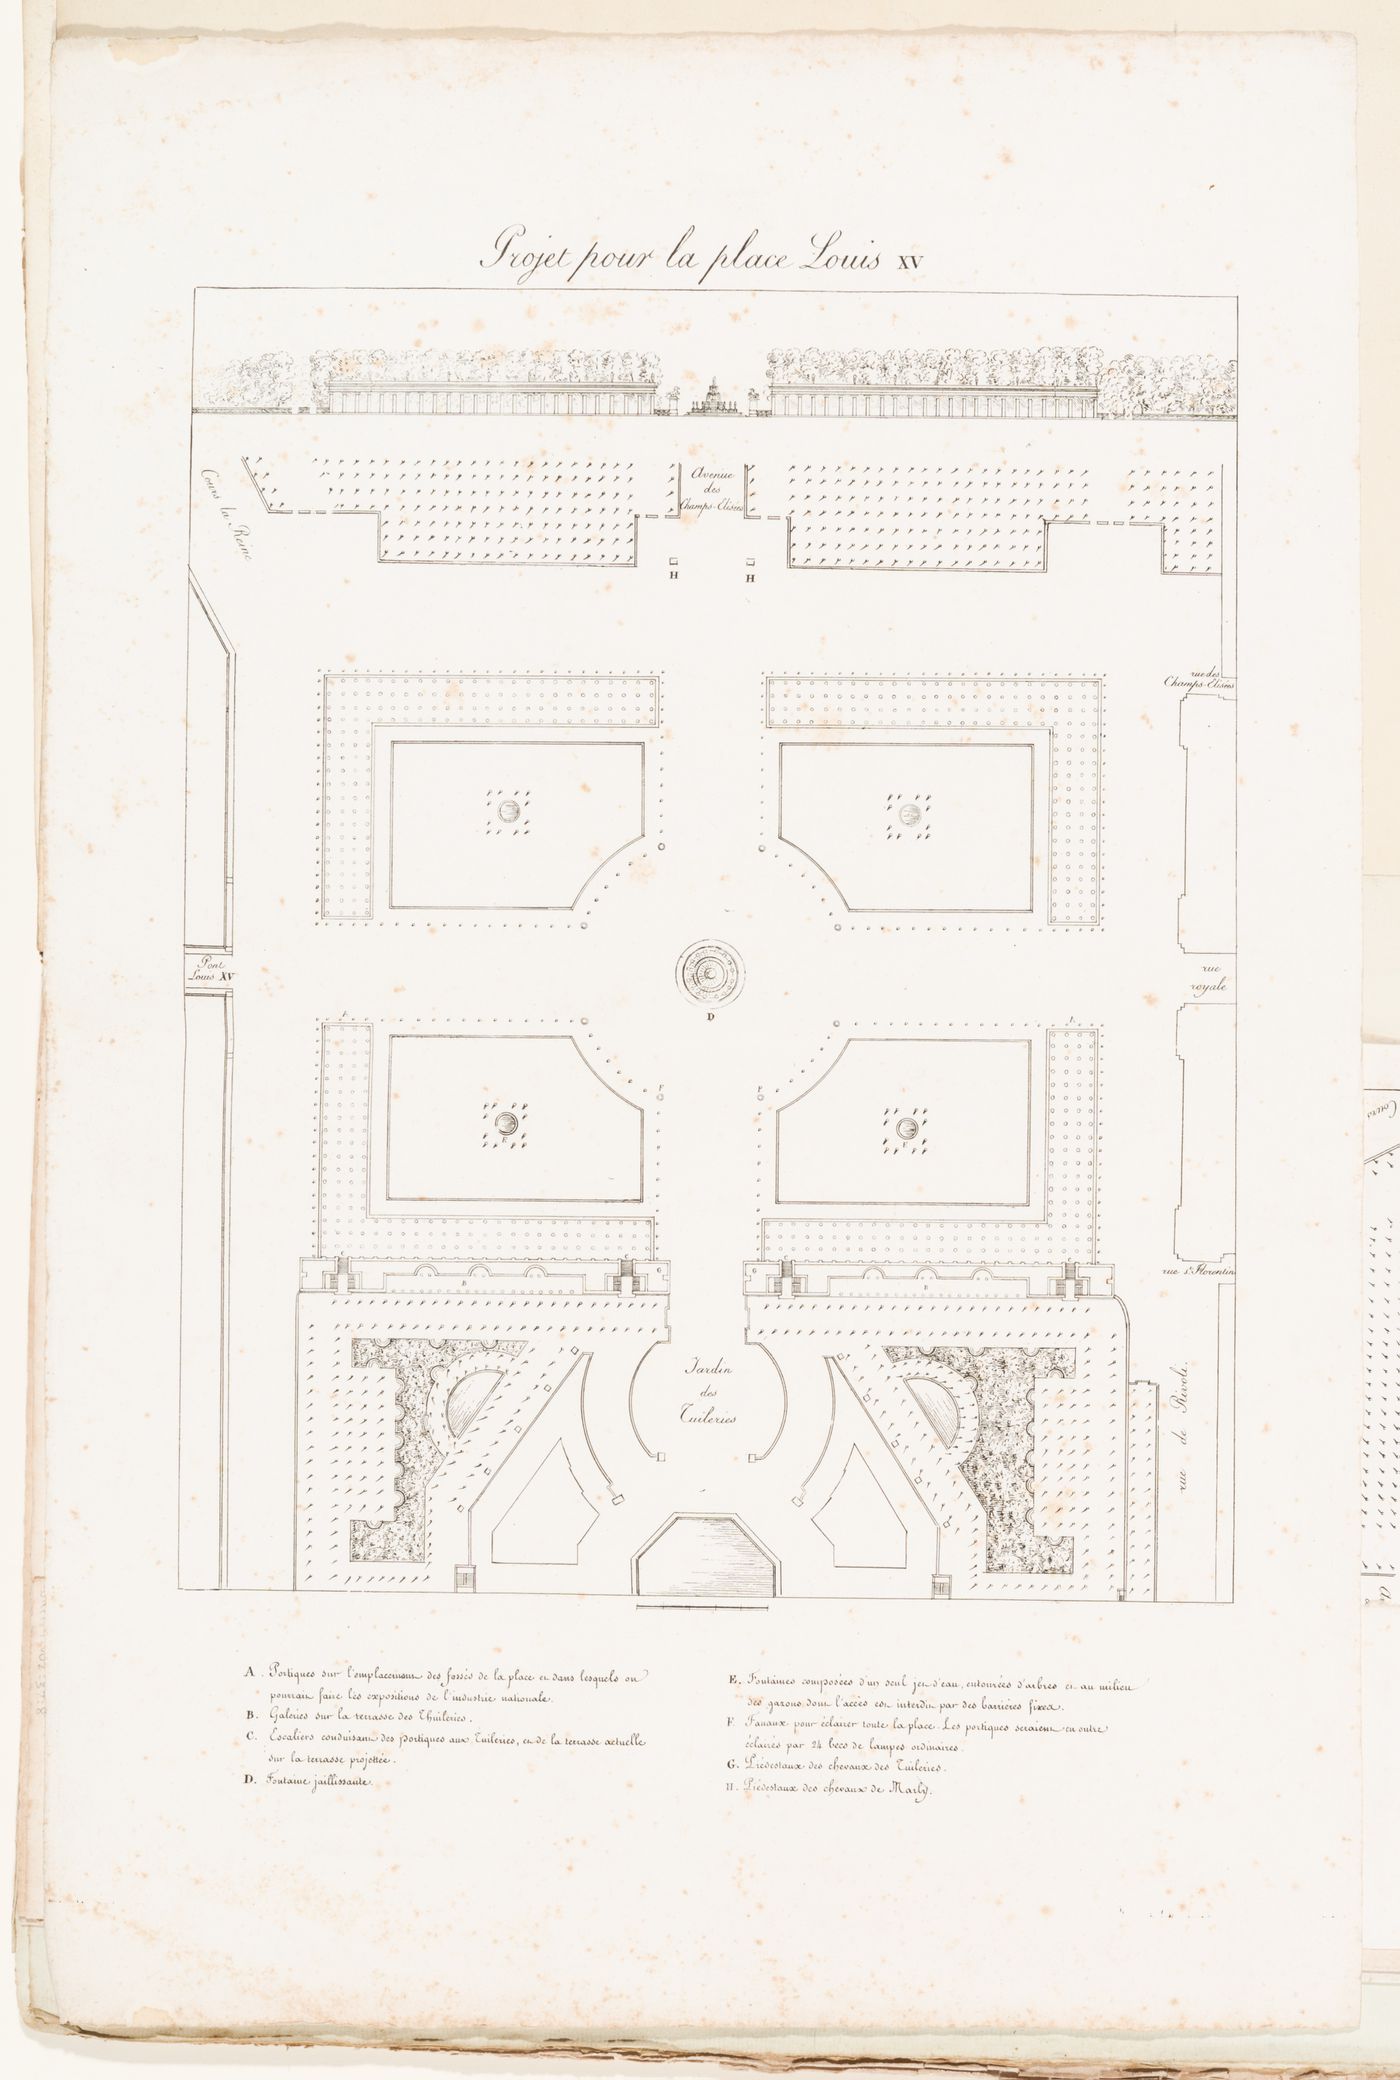 Plan and elevation for place Louis XV with five fountains, freestanding colonnades and loggias